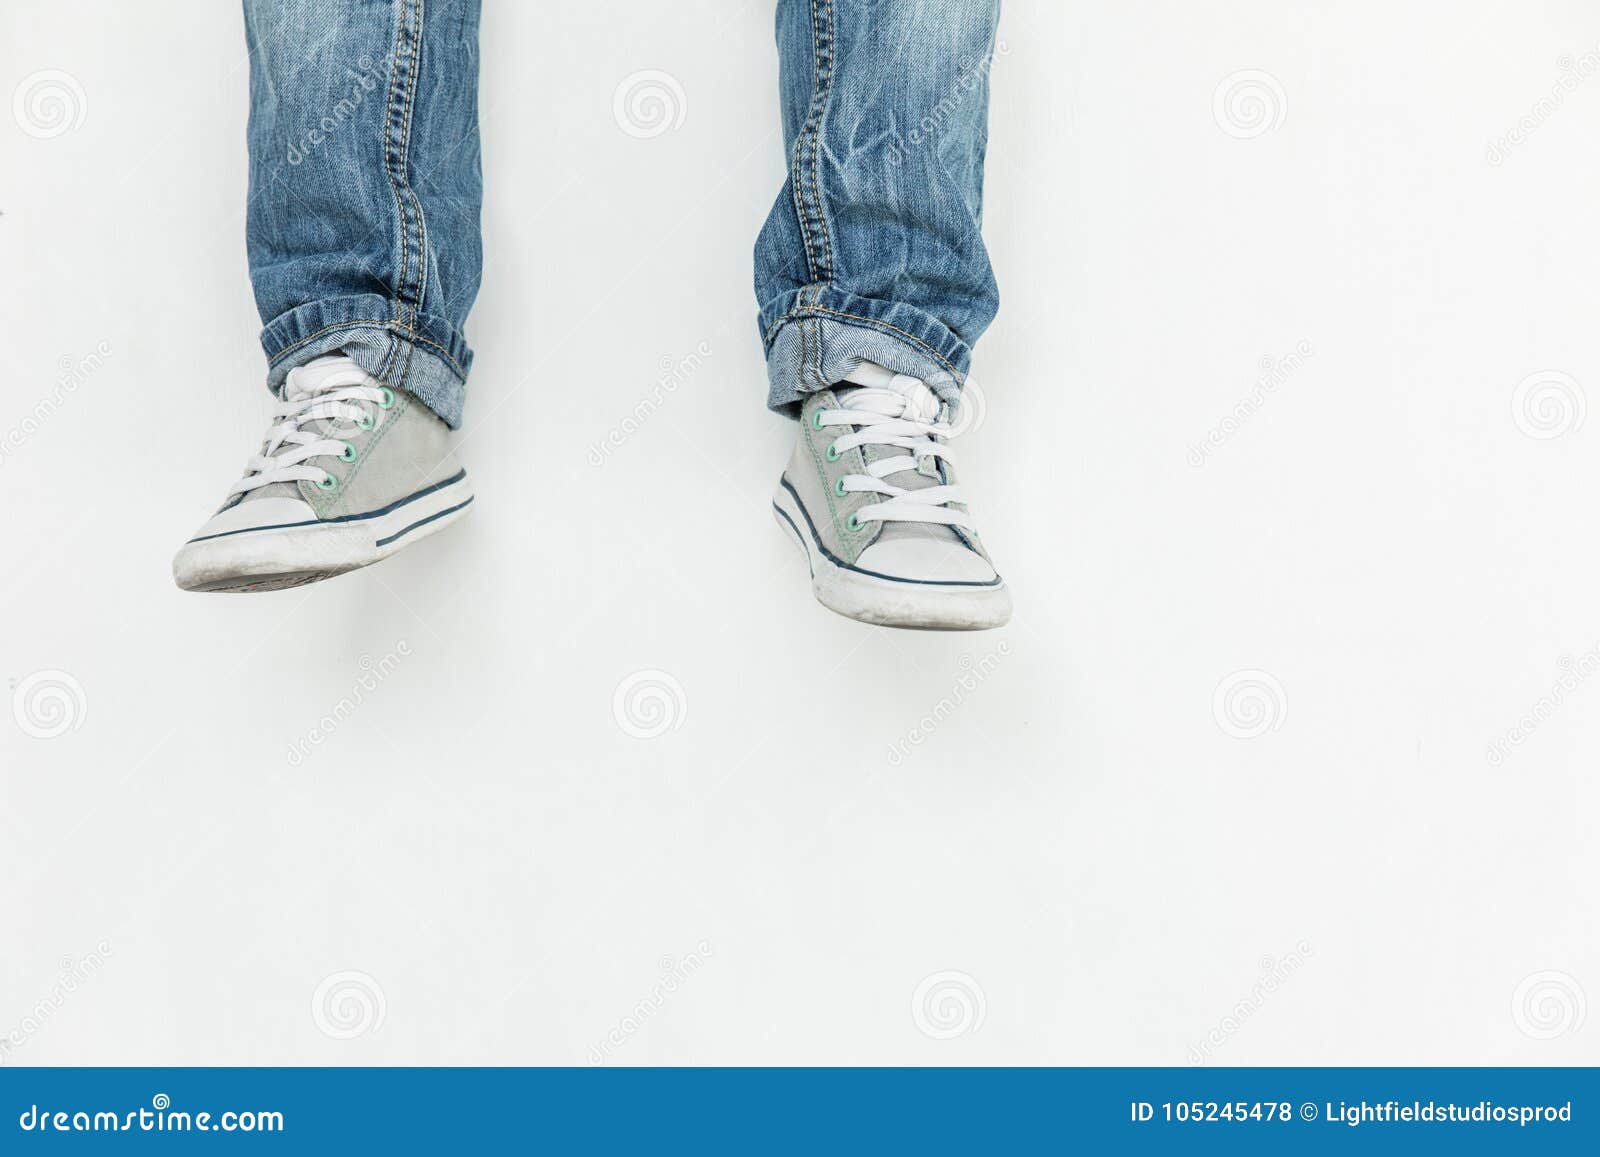 Child in jeans and shoes stock photo. Image of people - 105245478